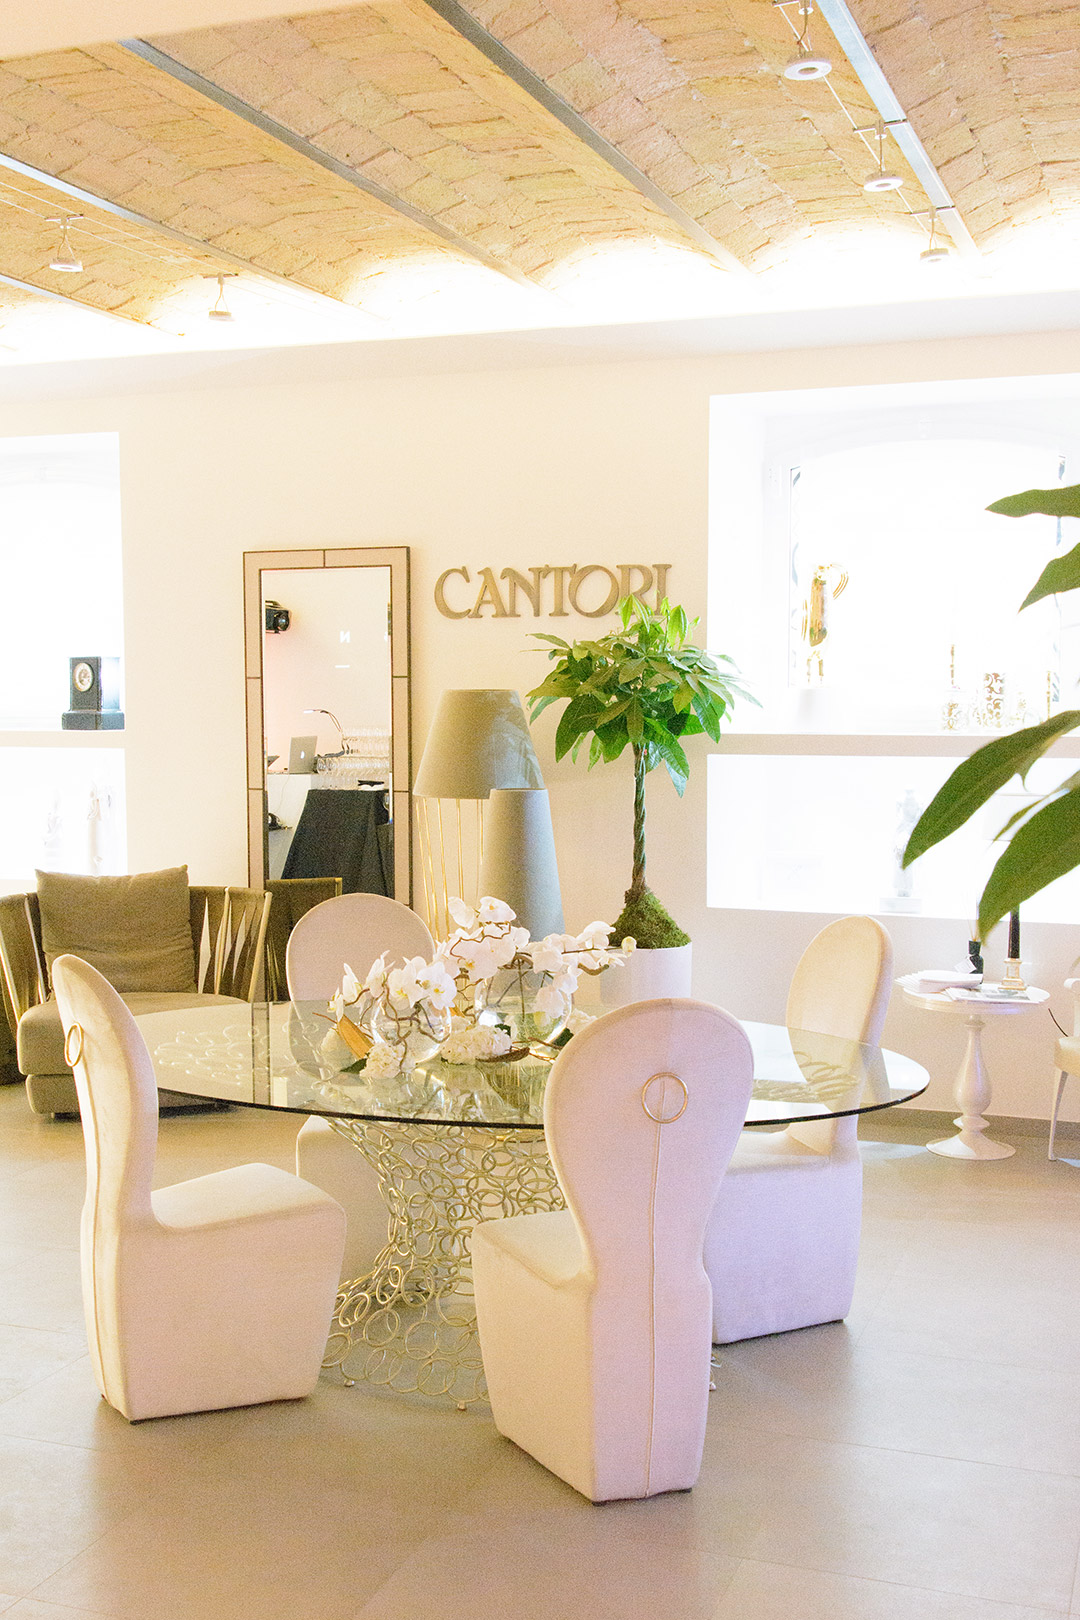 Showroom opening: THESIGN GALLERY - Cantori